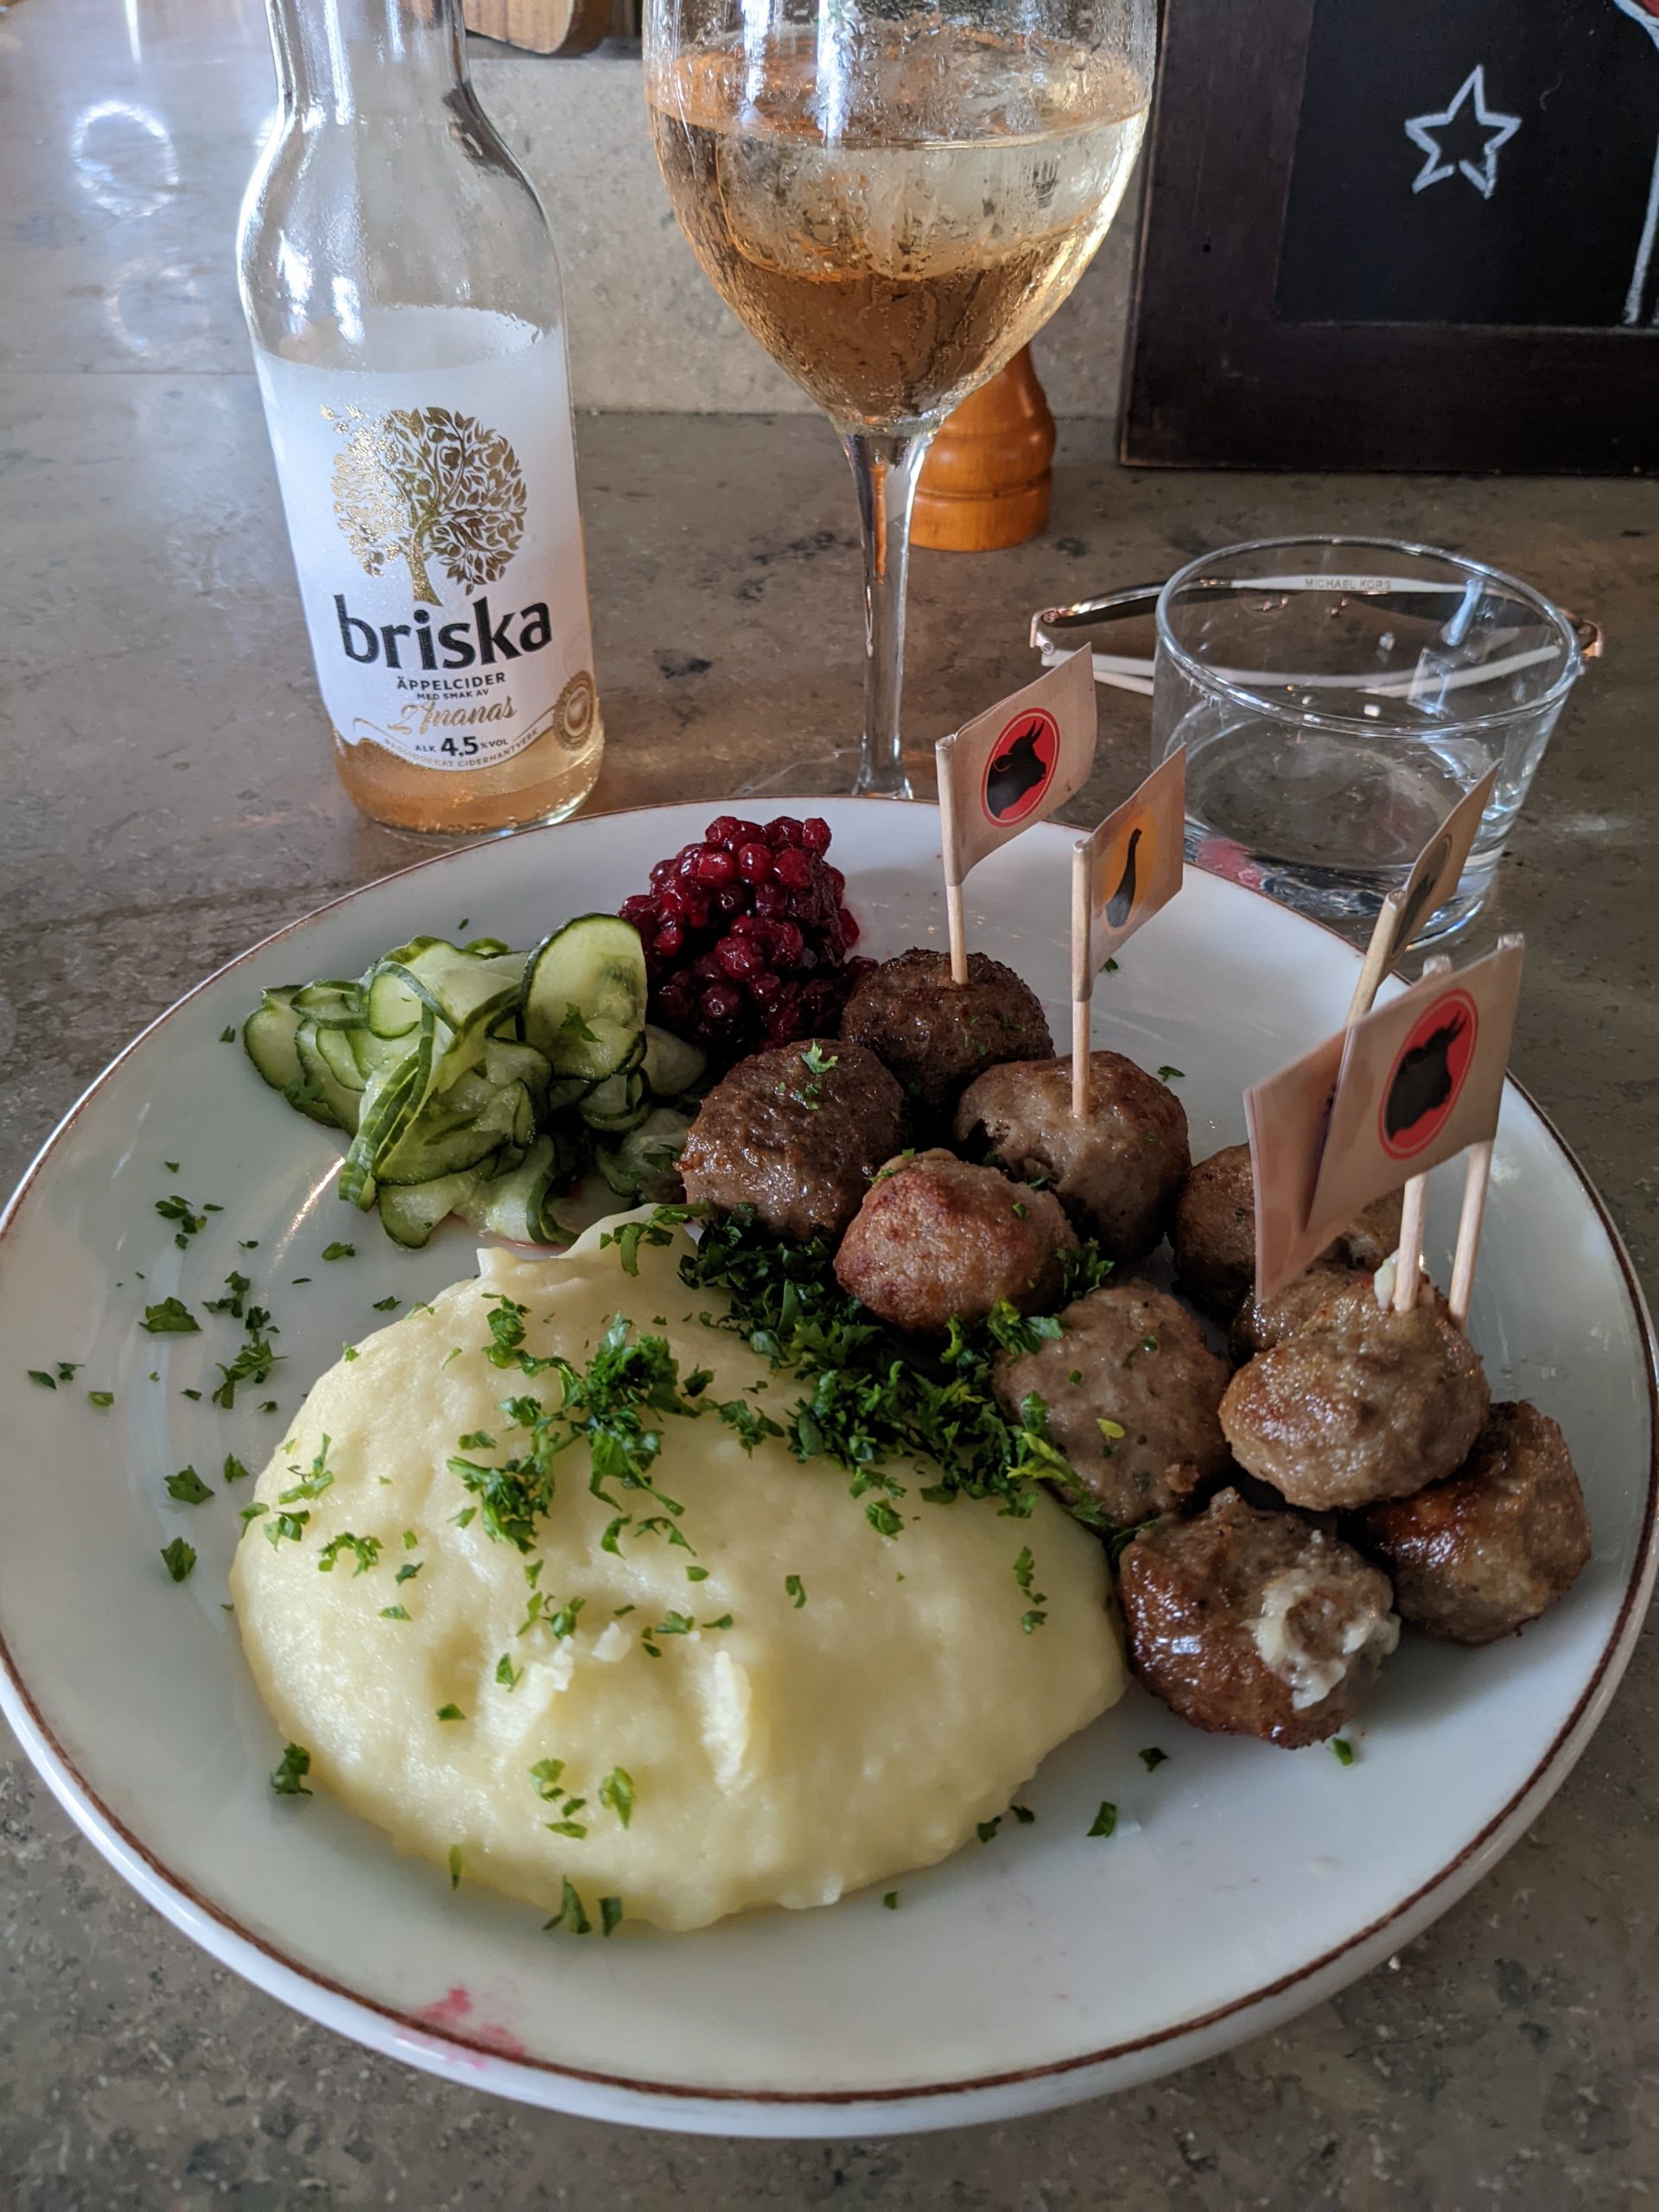 A plate with meatballs and mashed potatoes, beside it is a glass and a bottle.